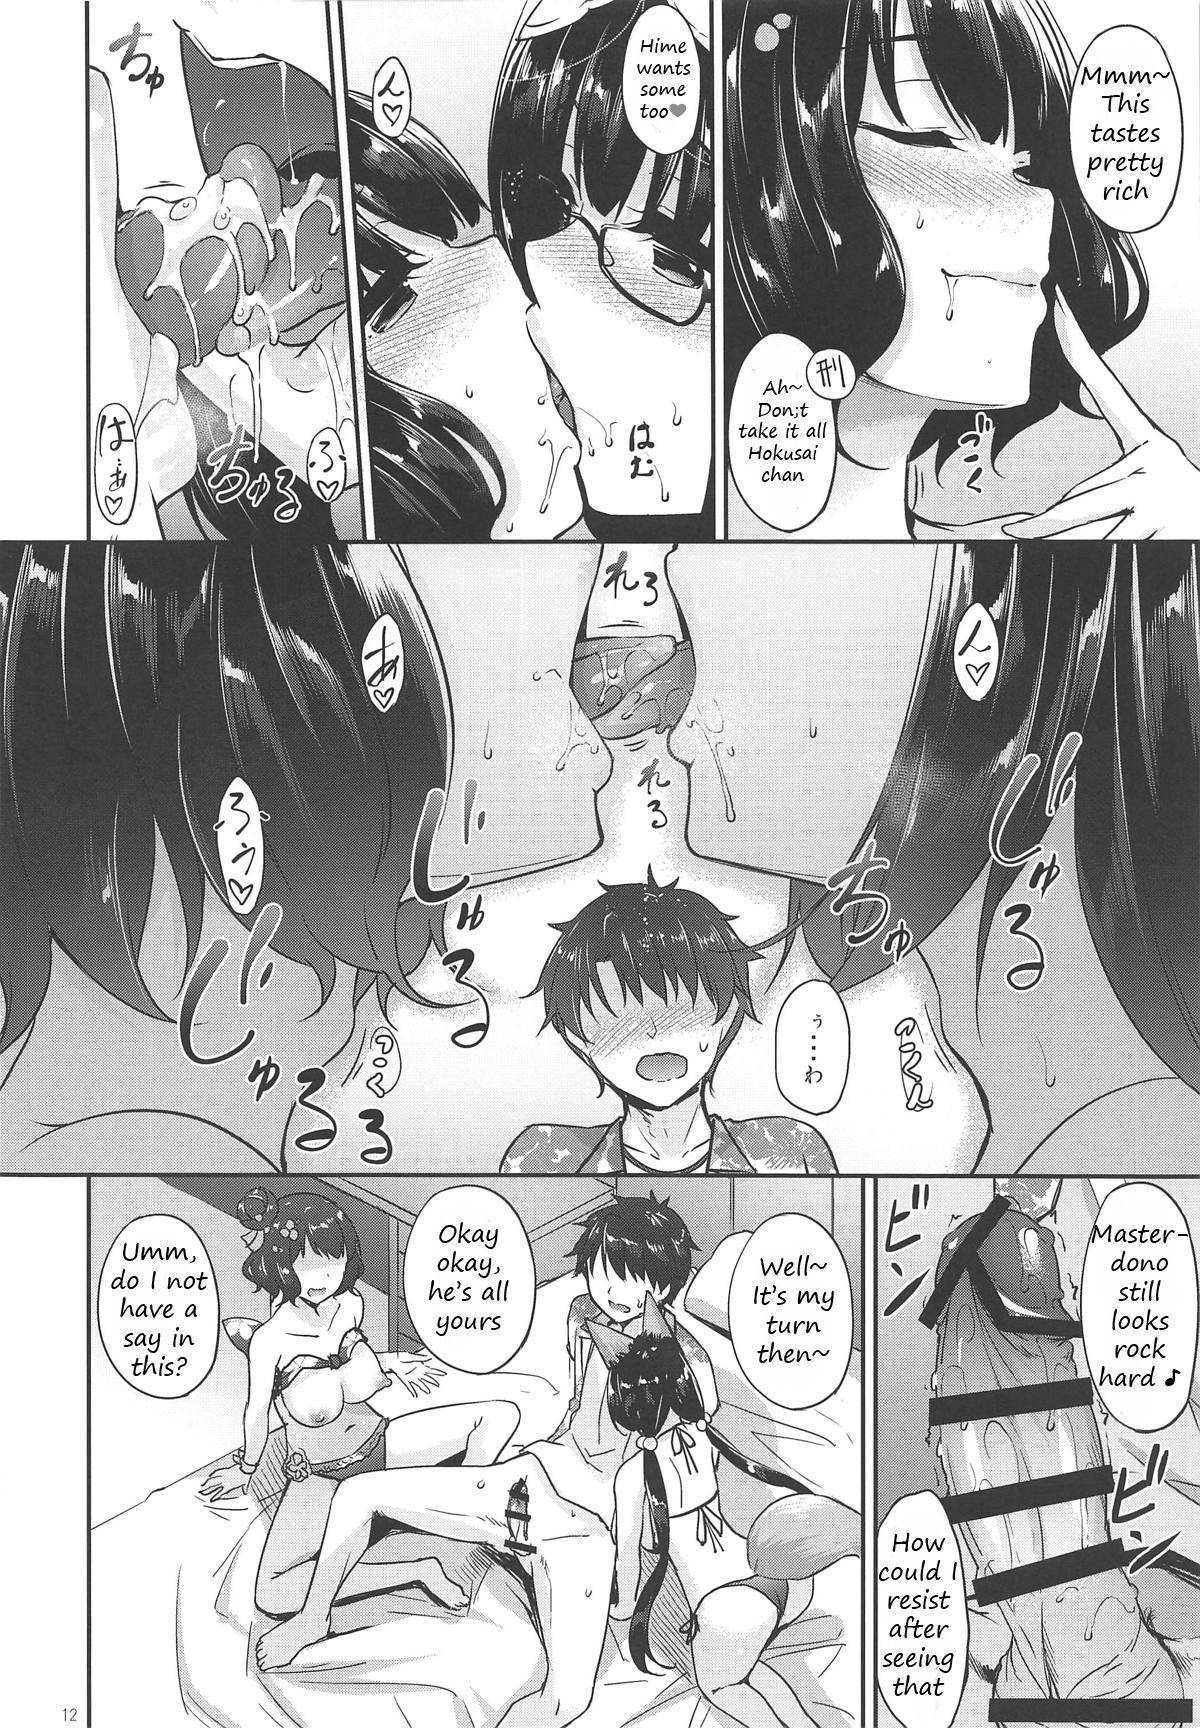 Behind Hokusai x Okkii Summer Imagination - Fate grand order Girls Getting Fucked - Page 11